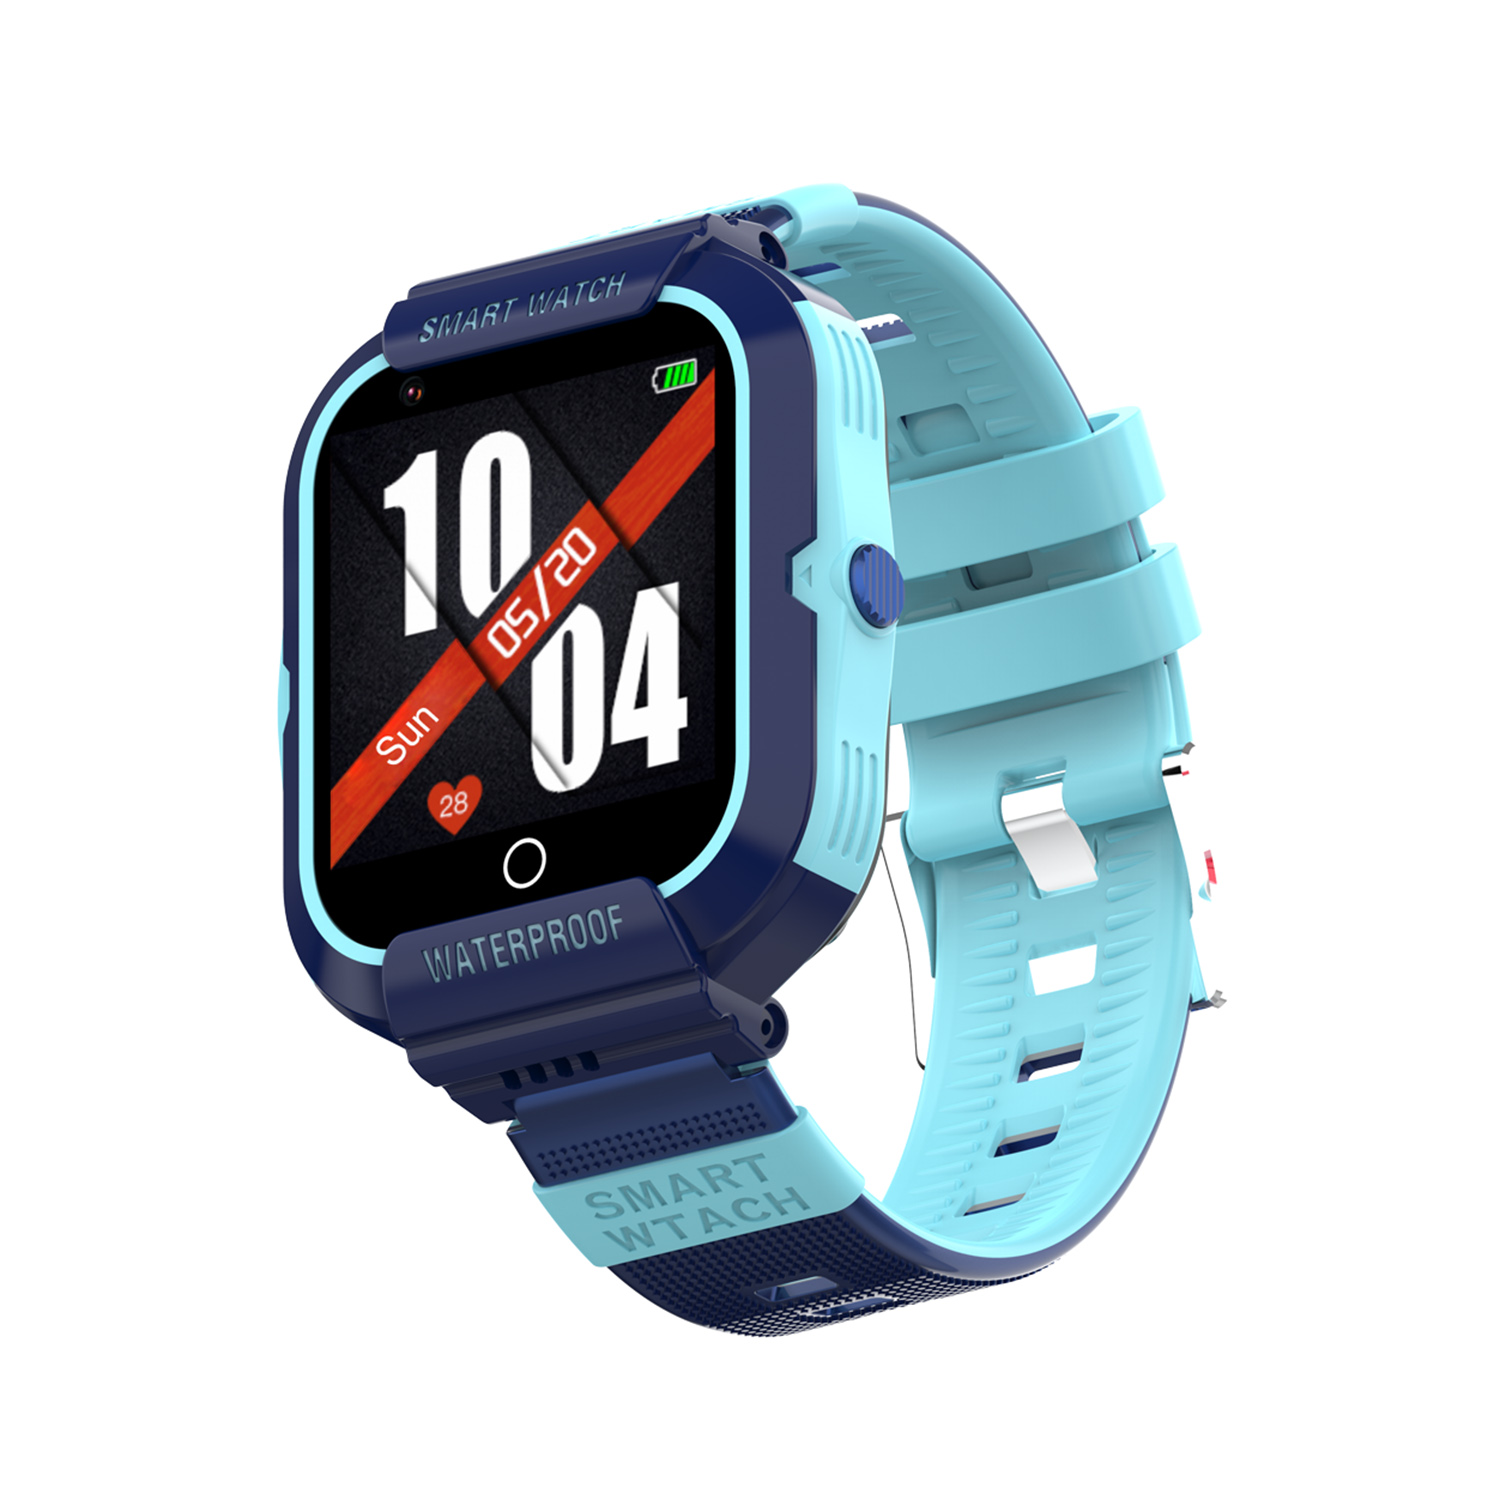 Quality 4G Waterproof Students GPS Tracker Watch with HD Camera 